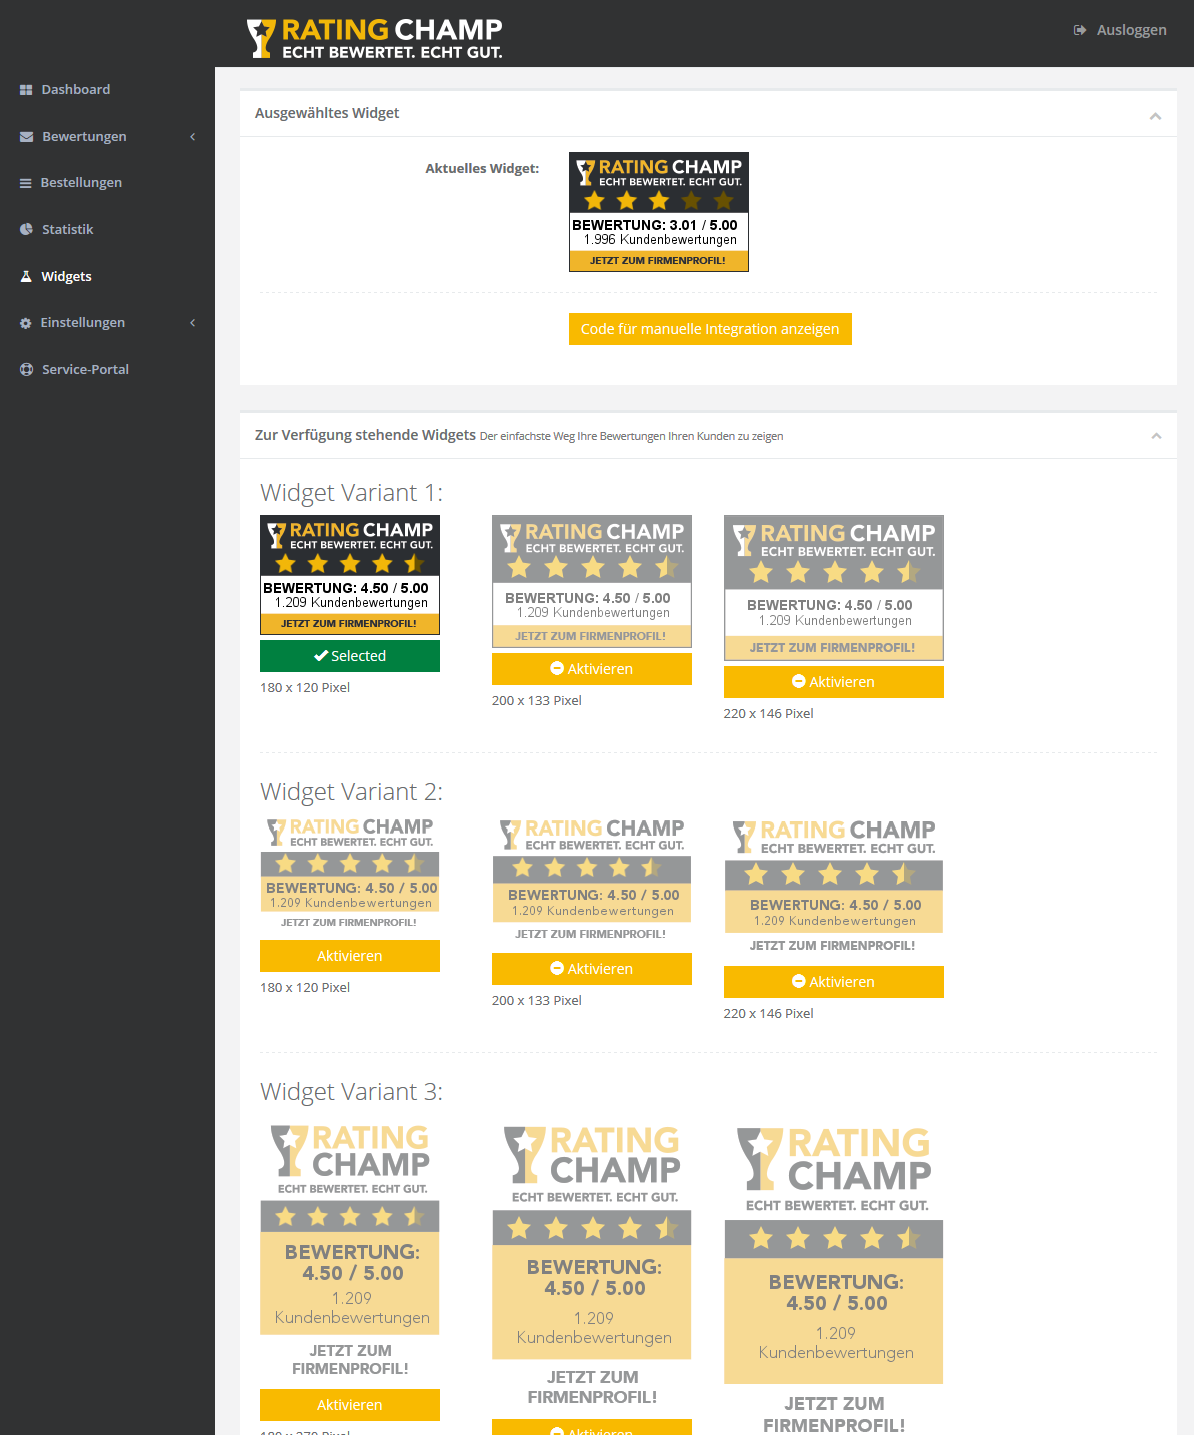 **RatinChamp Widget** - After you have gatherd 5 reviews your widget can be displayed in your WooCommerce store.